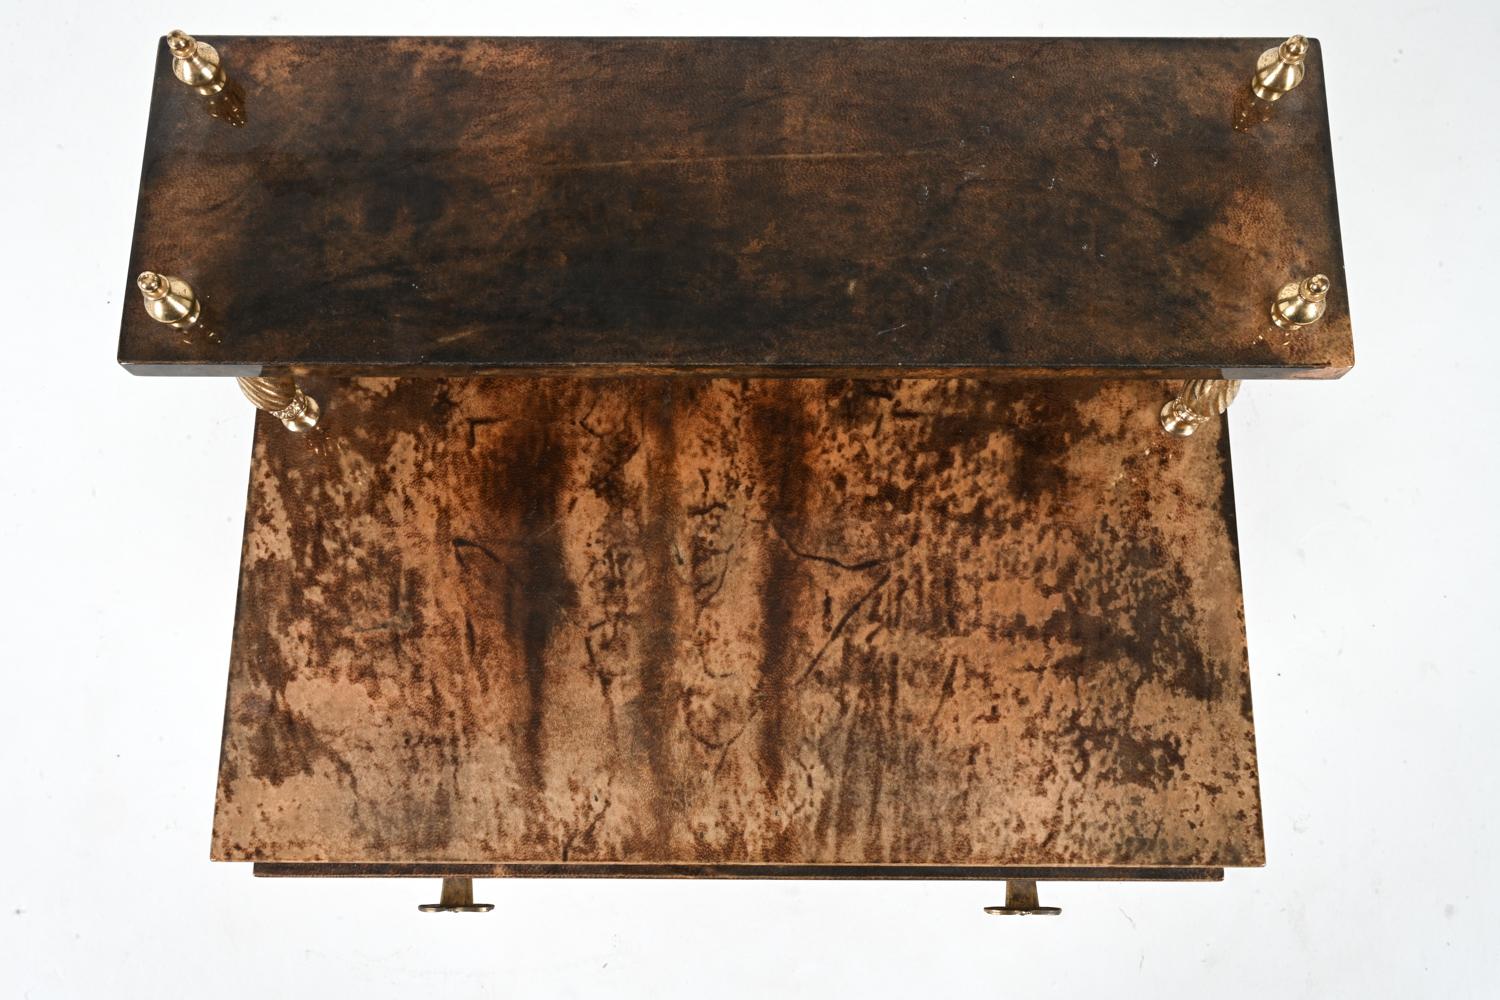 20th Century Aldo Tura Lacquered Goatskin & Brass Occasional Table, c. 1960's For Sale